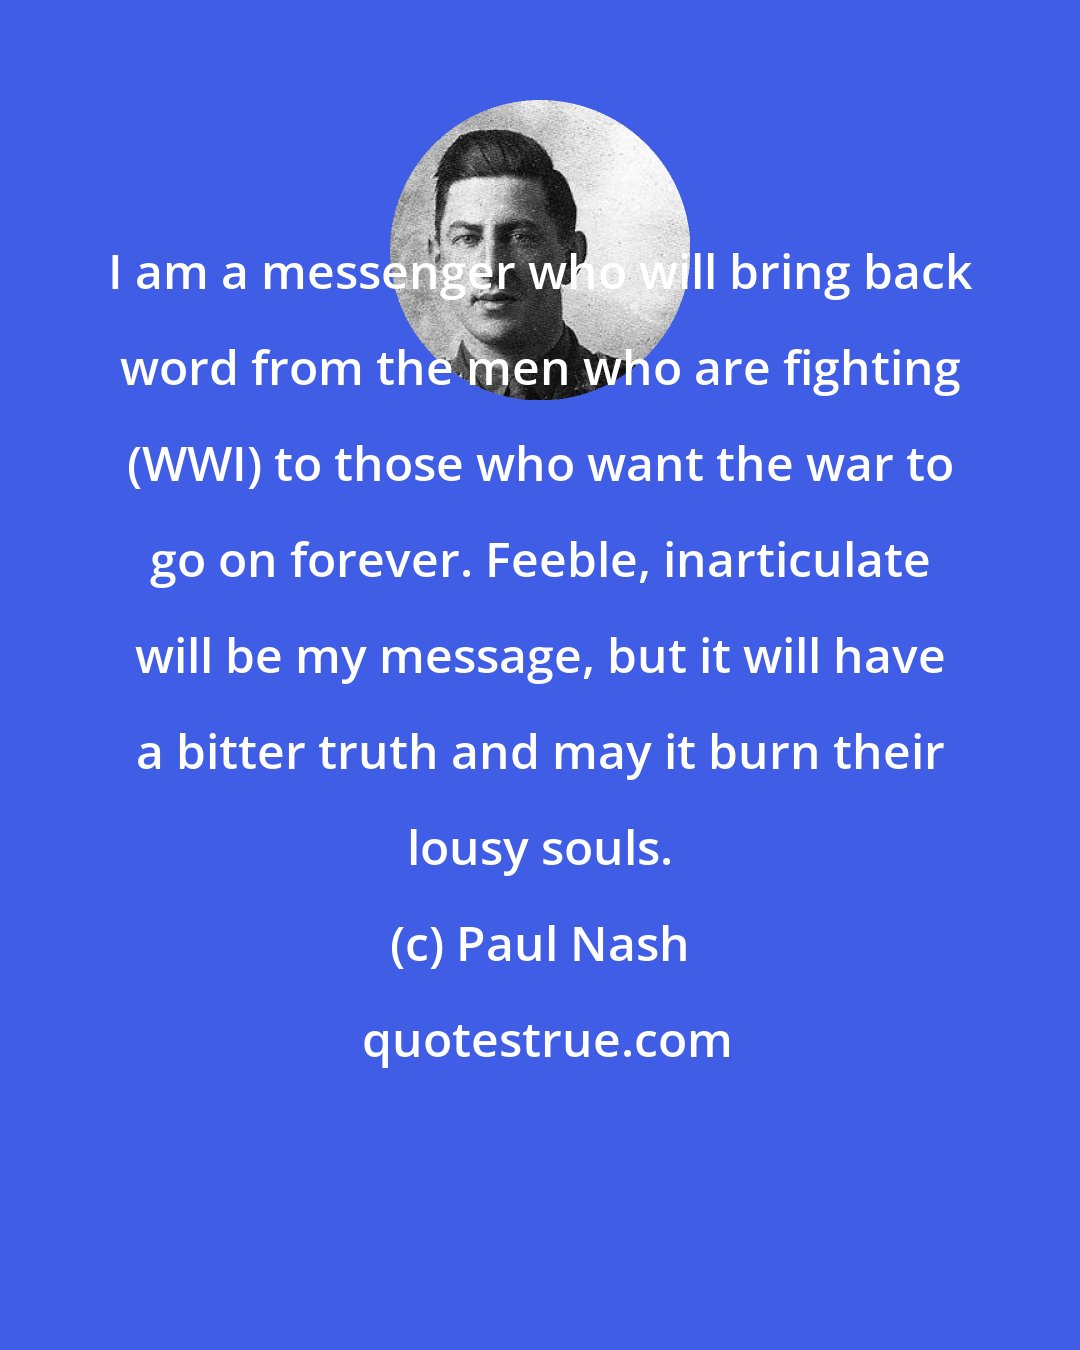 Paul Nash: I am a messenger who will bring back word from the men who are fighting (WWI) to those who want the war to go on forever. Feeble, inarticulate will be my message, but it will have a bitter truth and may it burn their lousy souls.